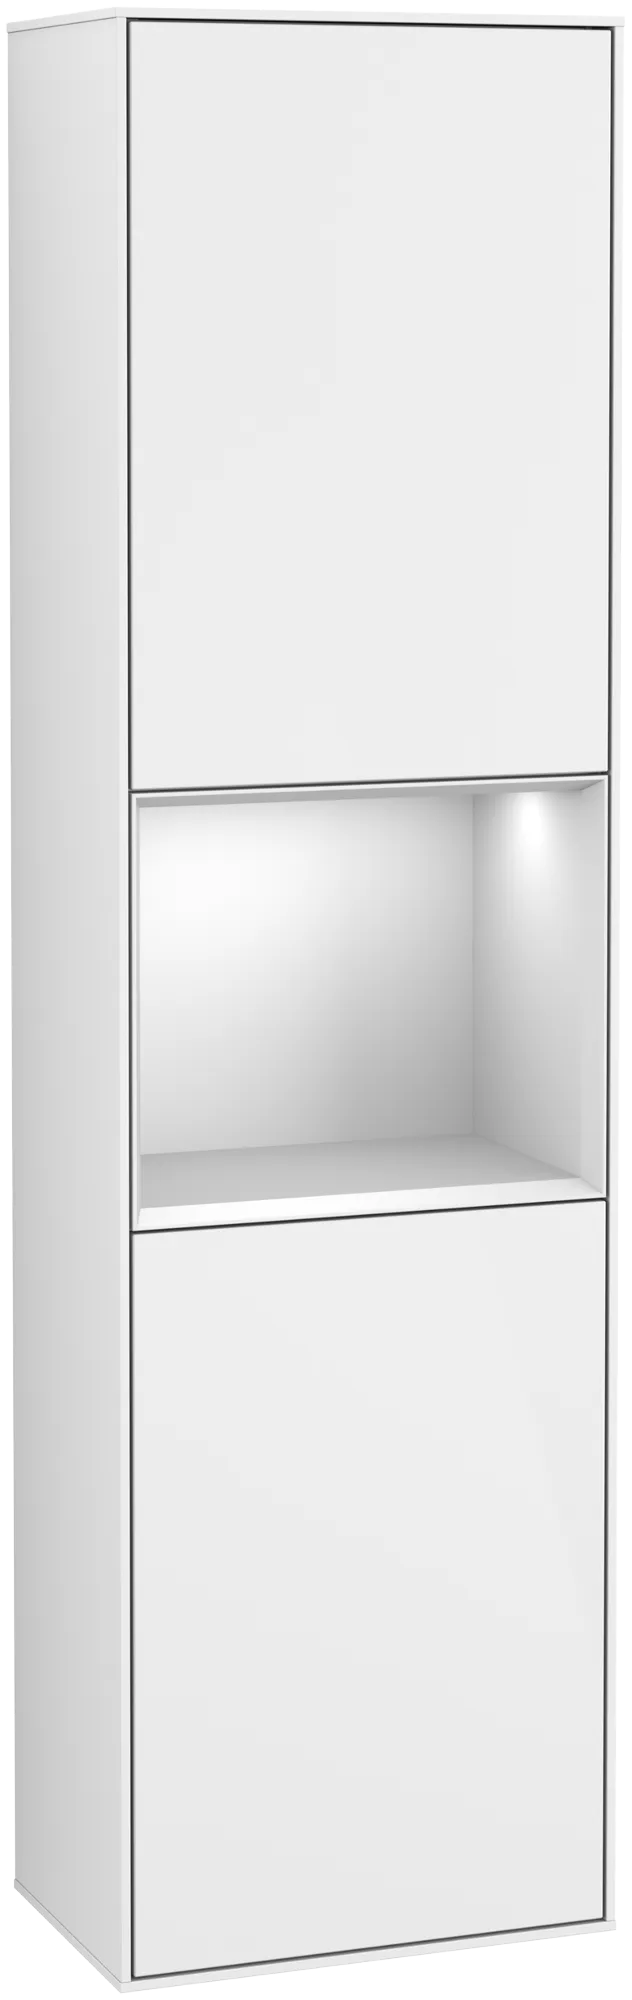 VILLEROY BOCH Finion Tall cabinet, with lighting, 2 doors, 418 x 1516 x 270 mm, Glossy White Lacquer / White Matt Lacquer #G460MTGF resmi